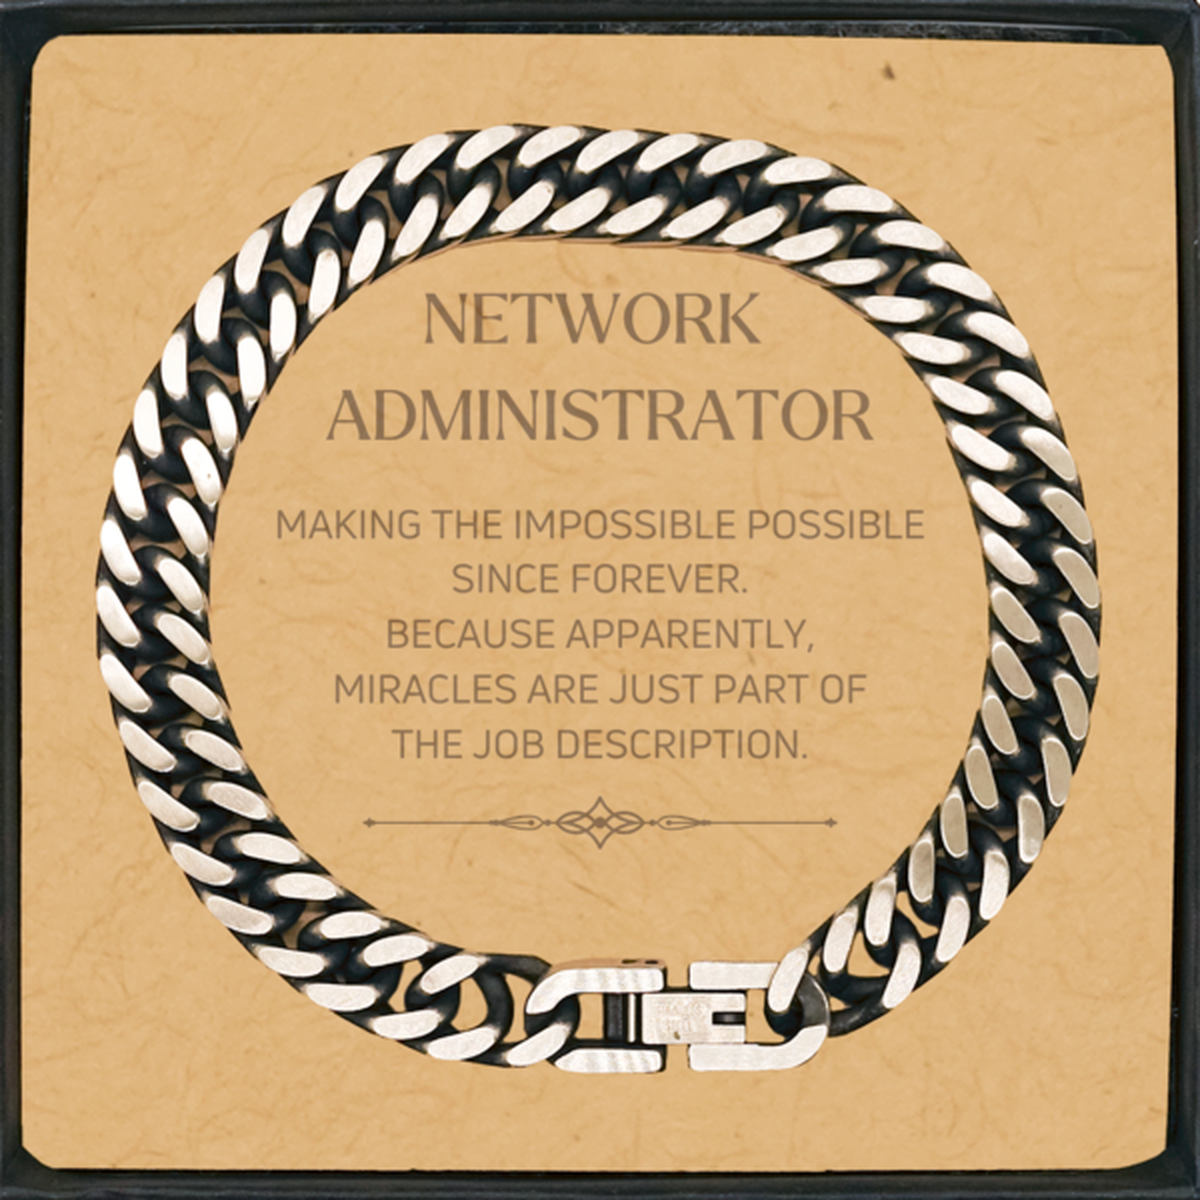 Funny Network Administrator Gifts, Miracles are just part of the job description, Inspirational Birthday Cuban Link Chain Bracelet For Network Administrator, Men, Women, Coworkers, Friends, Boss